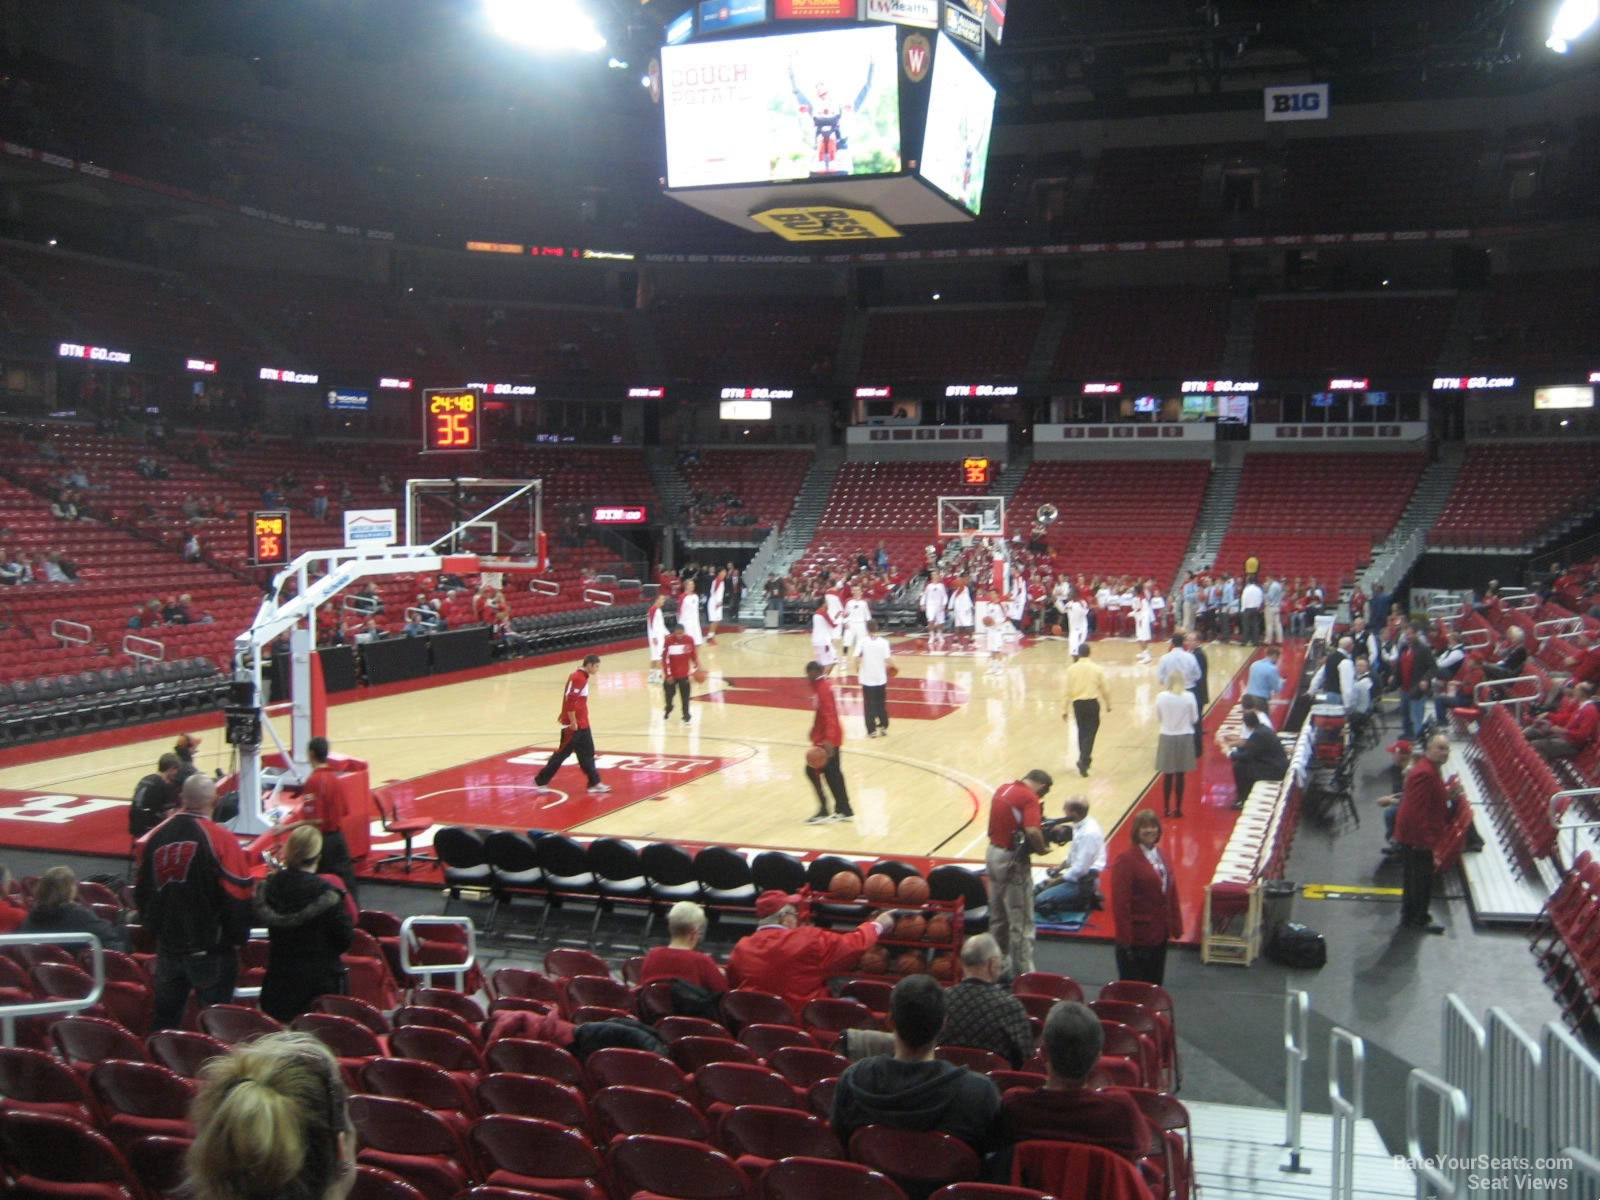 section 128 seat view  - kohl center